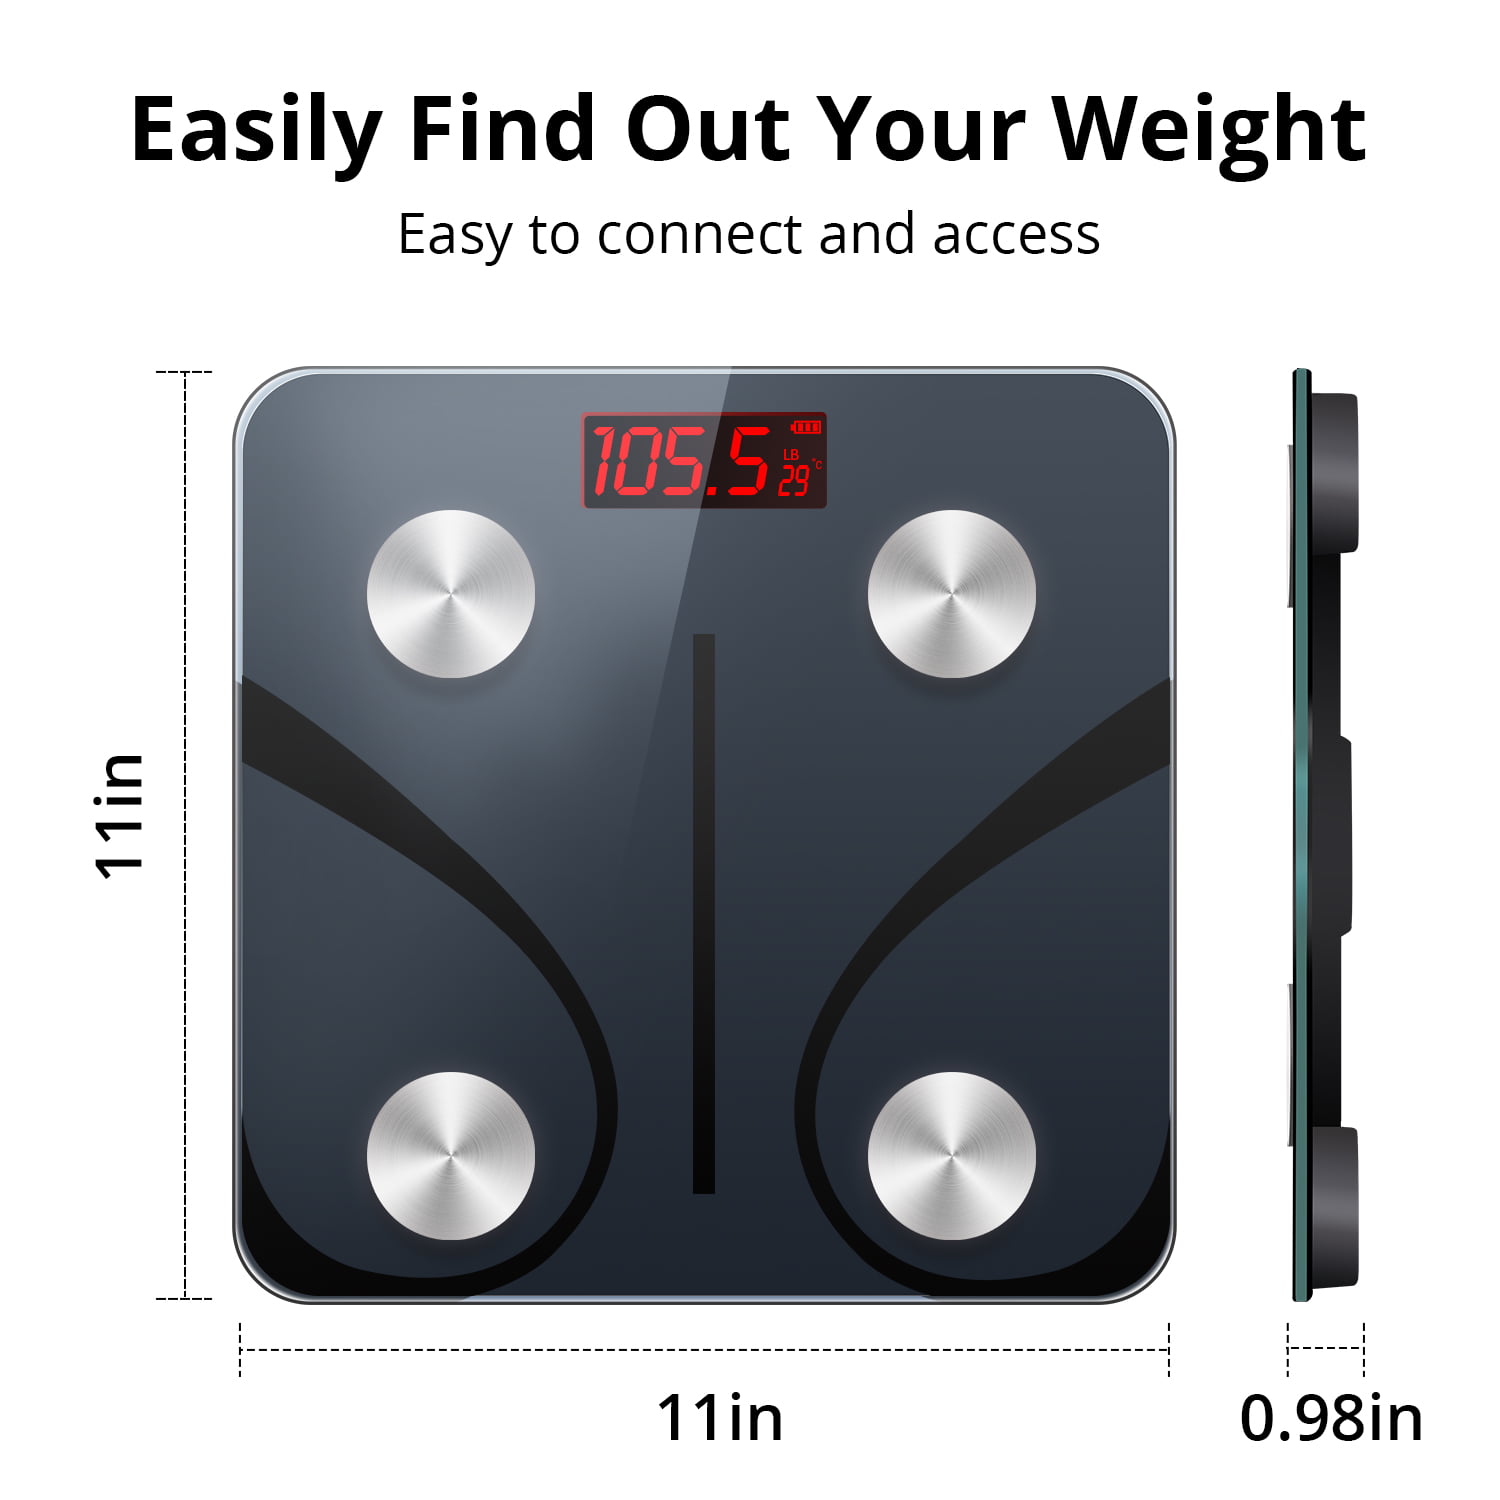 arboleaf Scale for Body Weight, Highly Accurate Weight Scale, Smart  Bathroom Scale, 14 Key Body Composition Analysis Sync Apps, 5 to 400 lbs  White